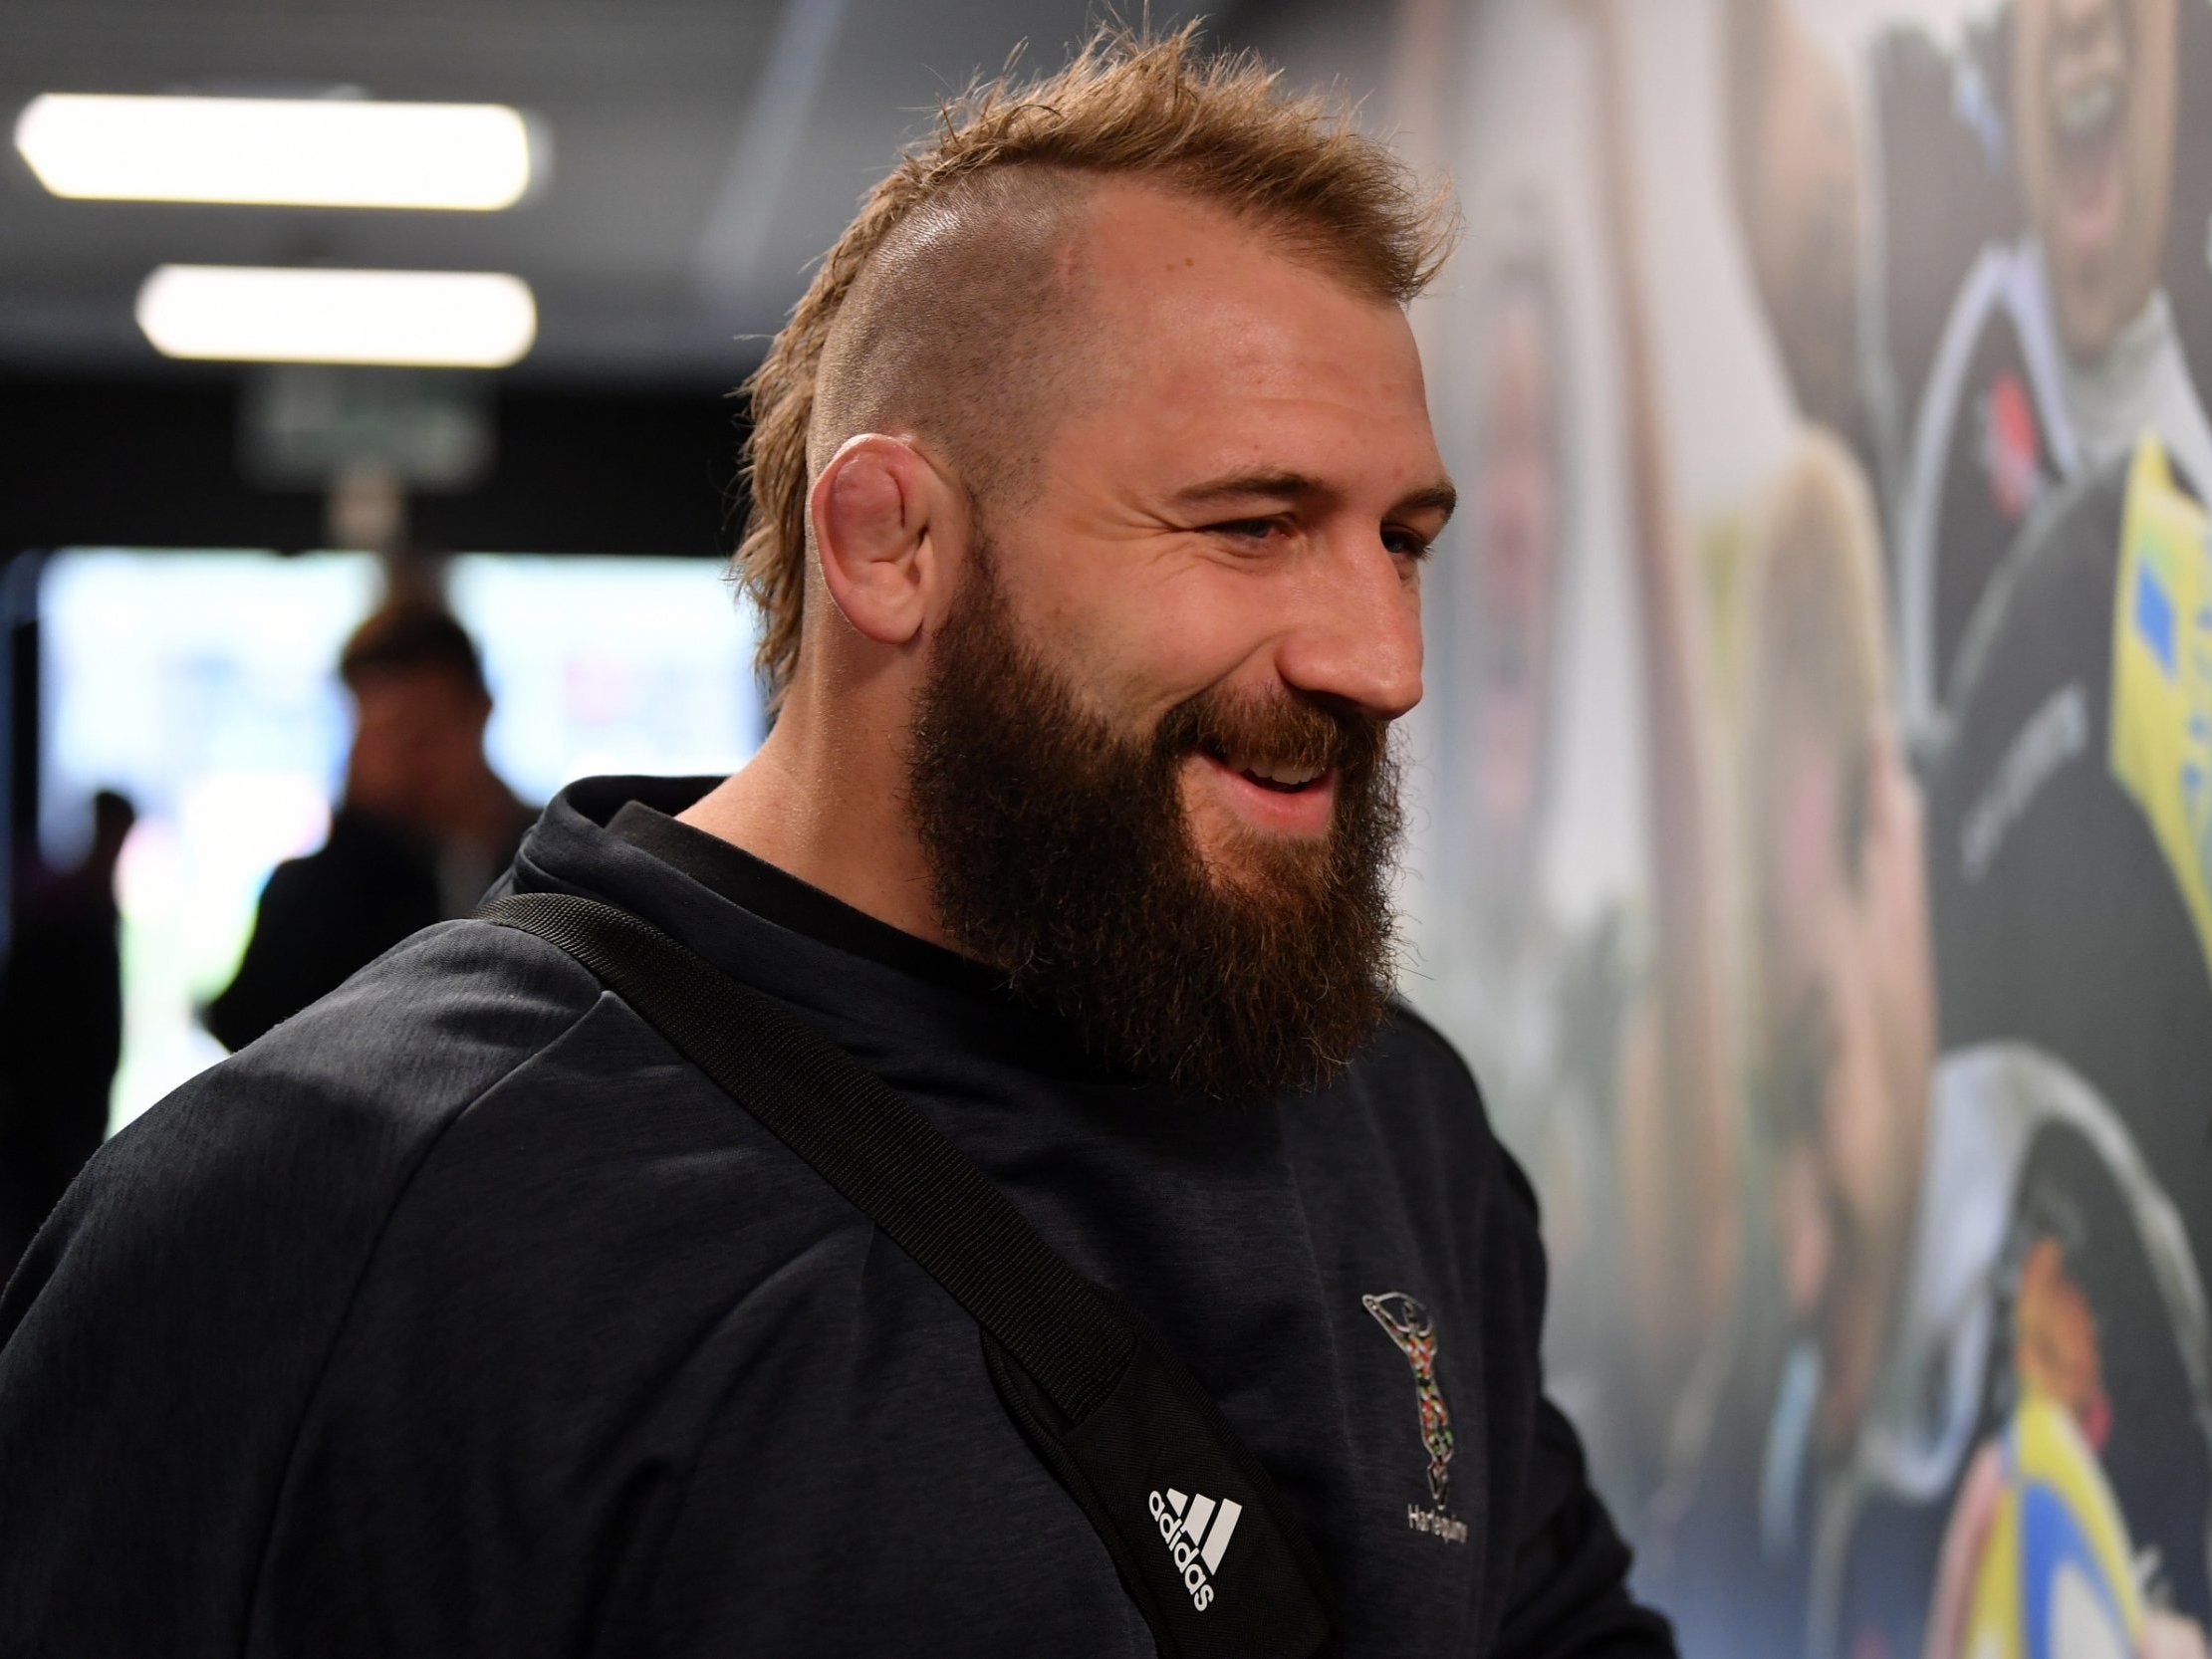 Rugby World Cup 2019: Joe Marler willing to step into breach of England loosehead injury crisis